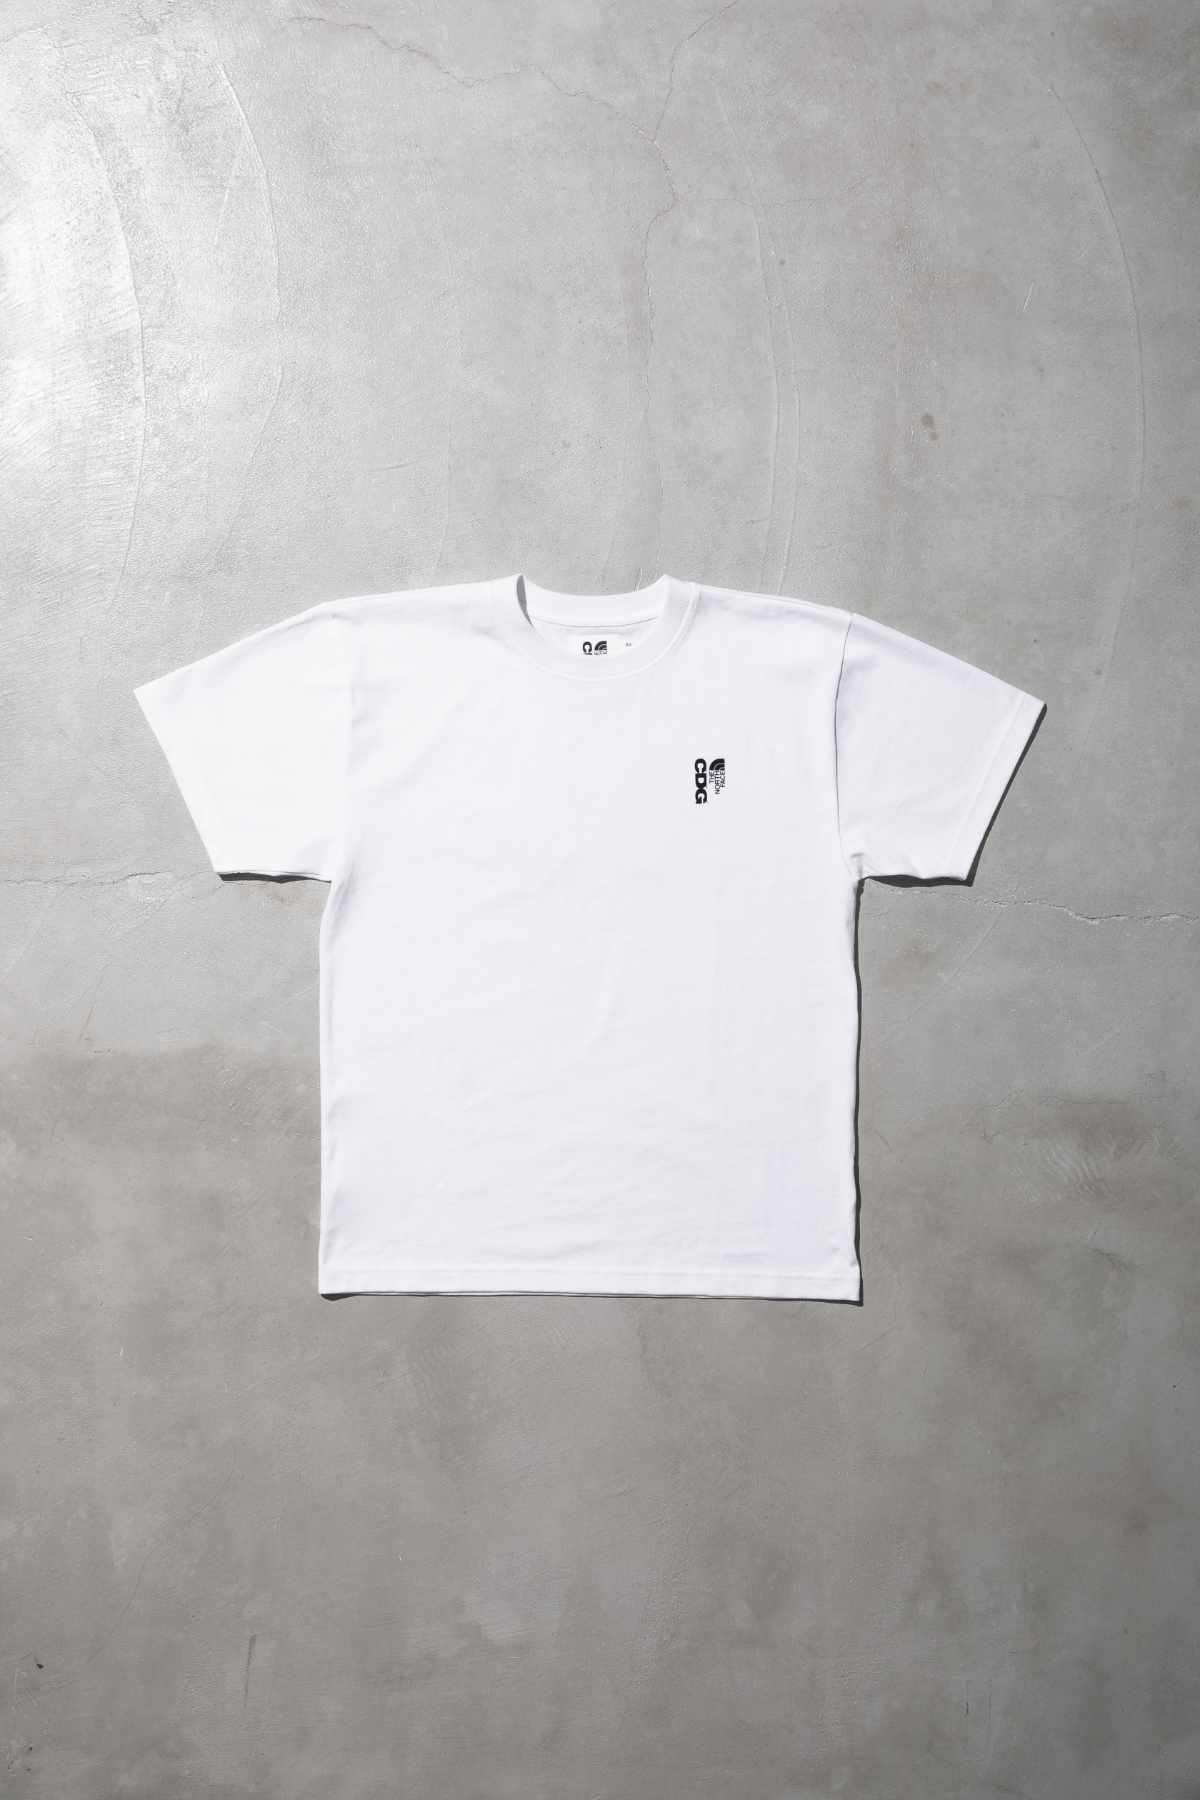 The CDG x TNF collab's white T-shirt